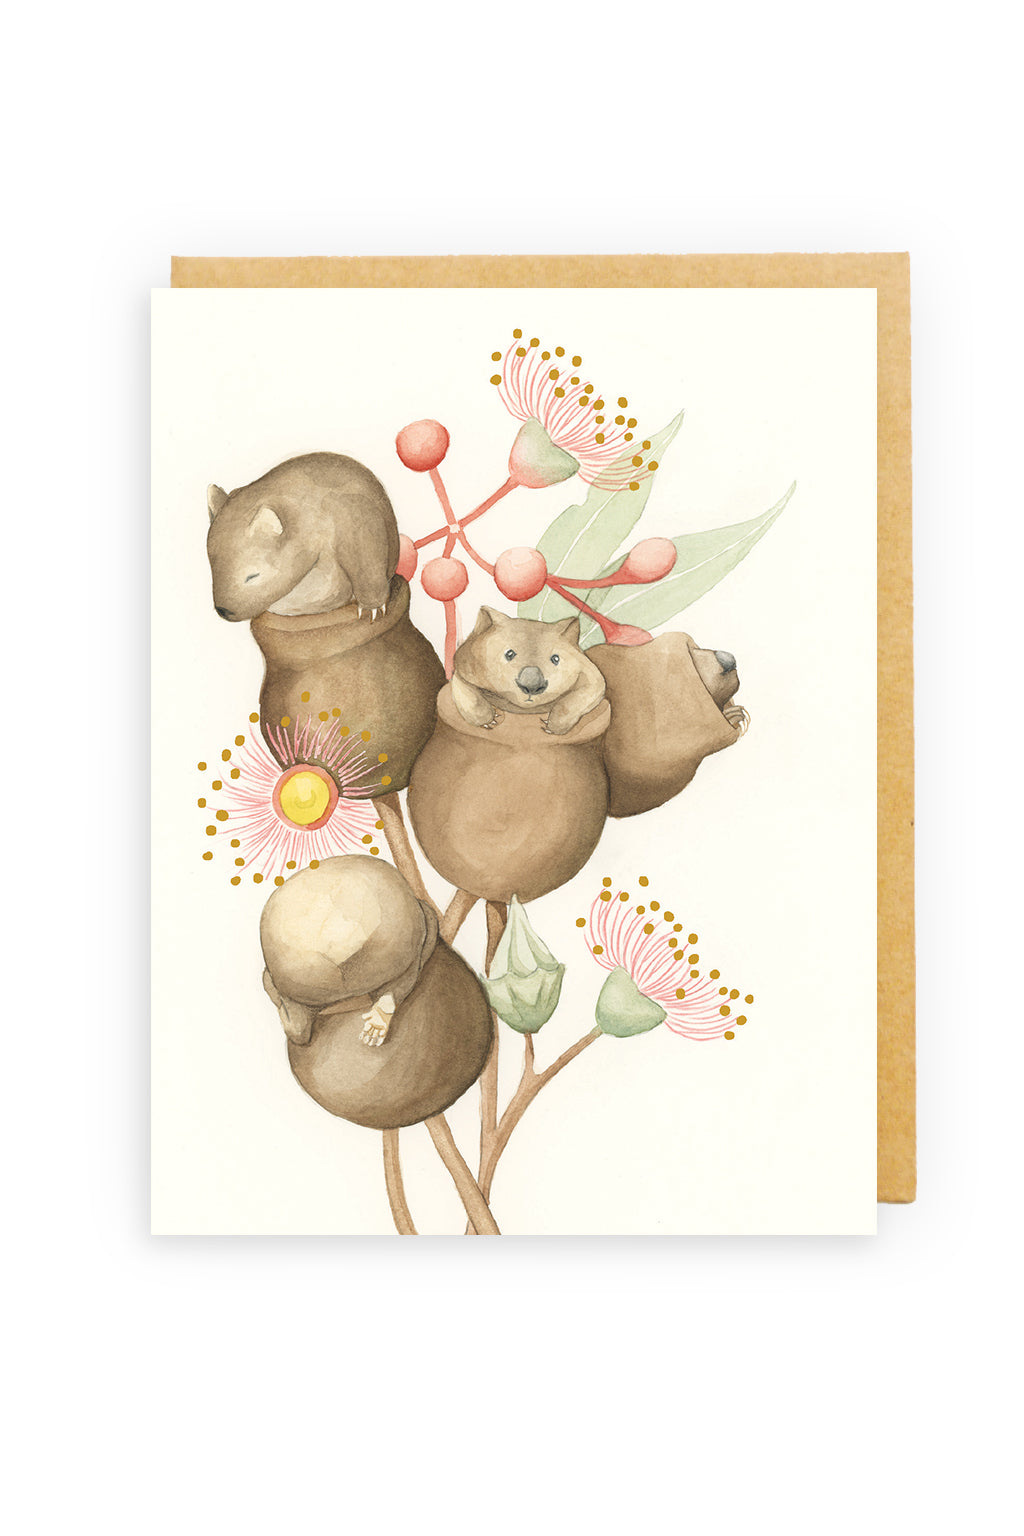 Squirrel Design Studio-Womnut GOLD FOIL  - Greeting Card-Mott and Mulberry